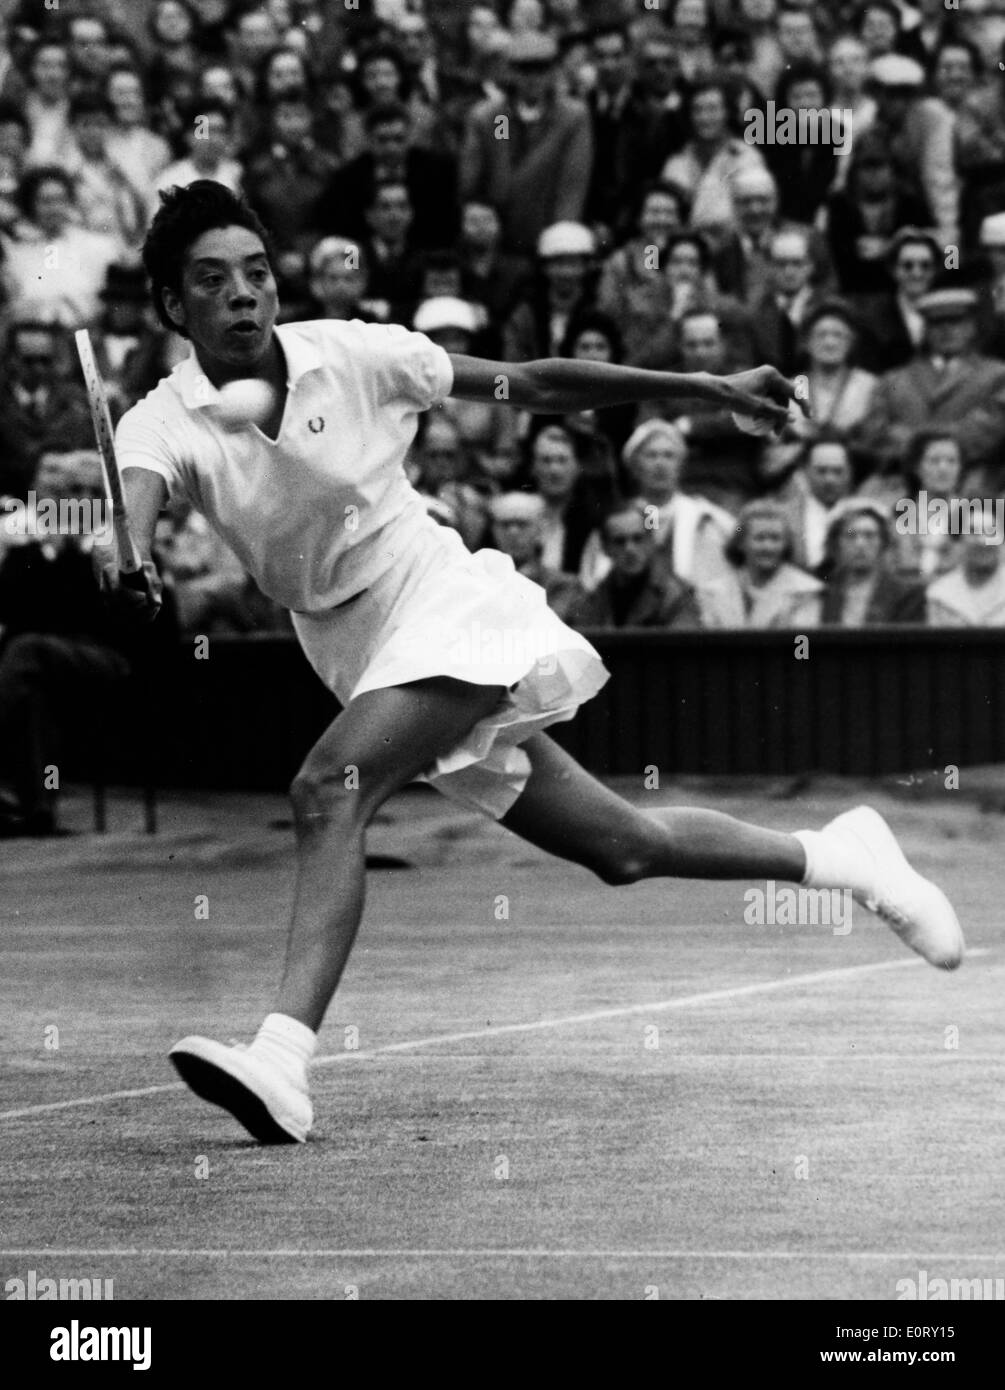 Tennis pro Althea Gibson goes after ball during match Stock Photo